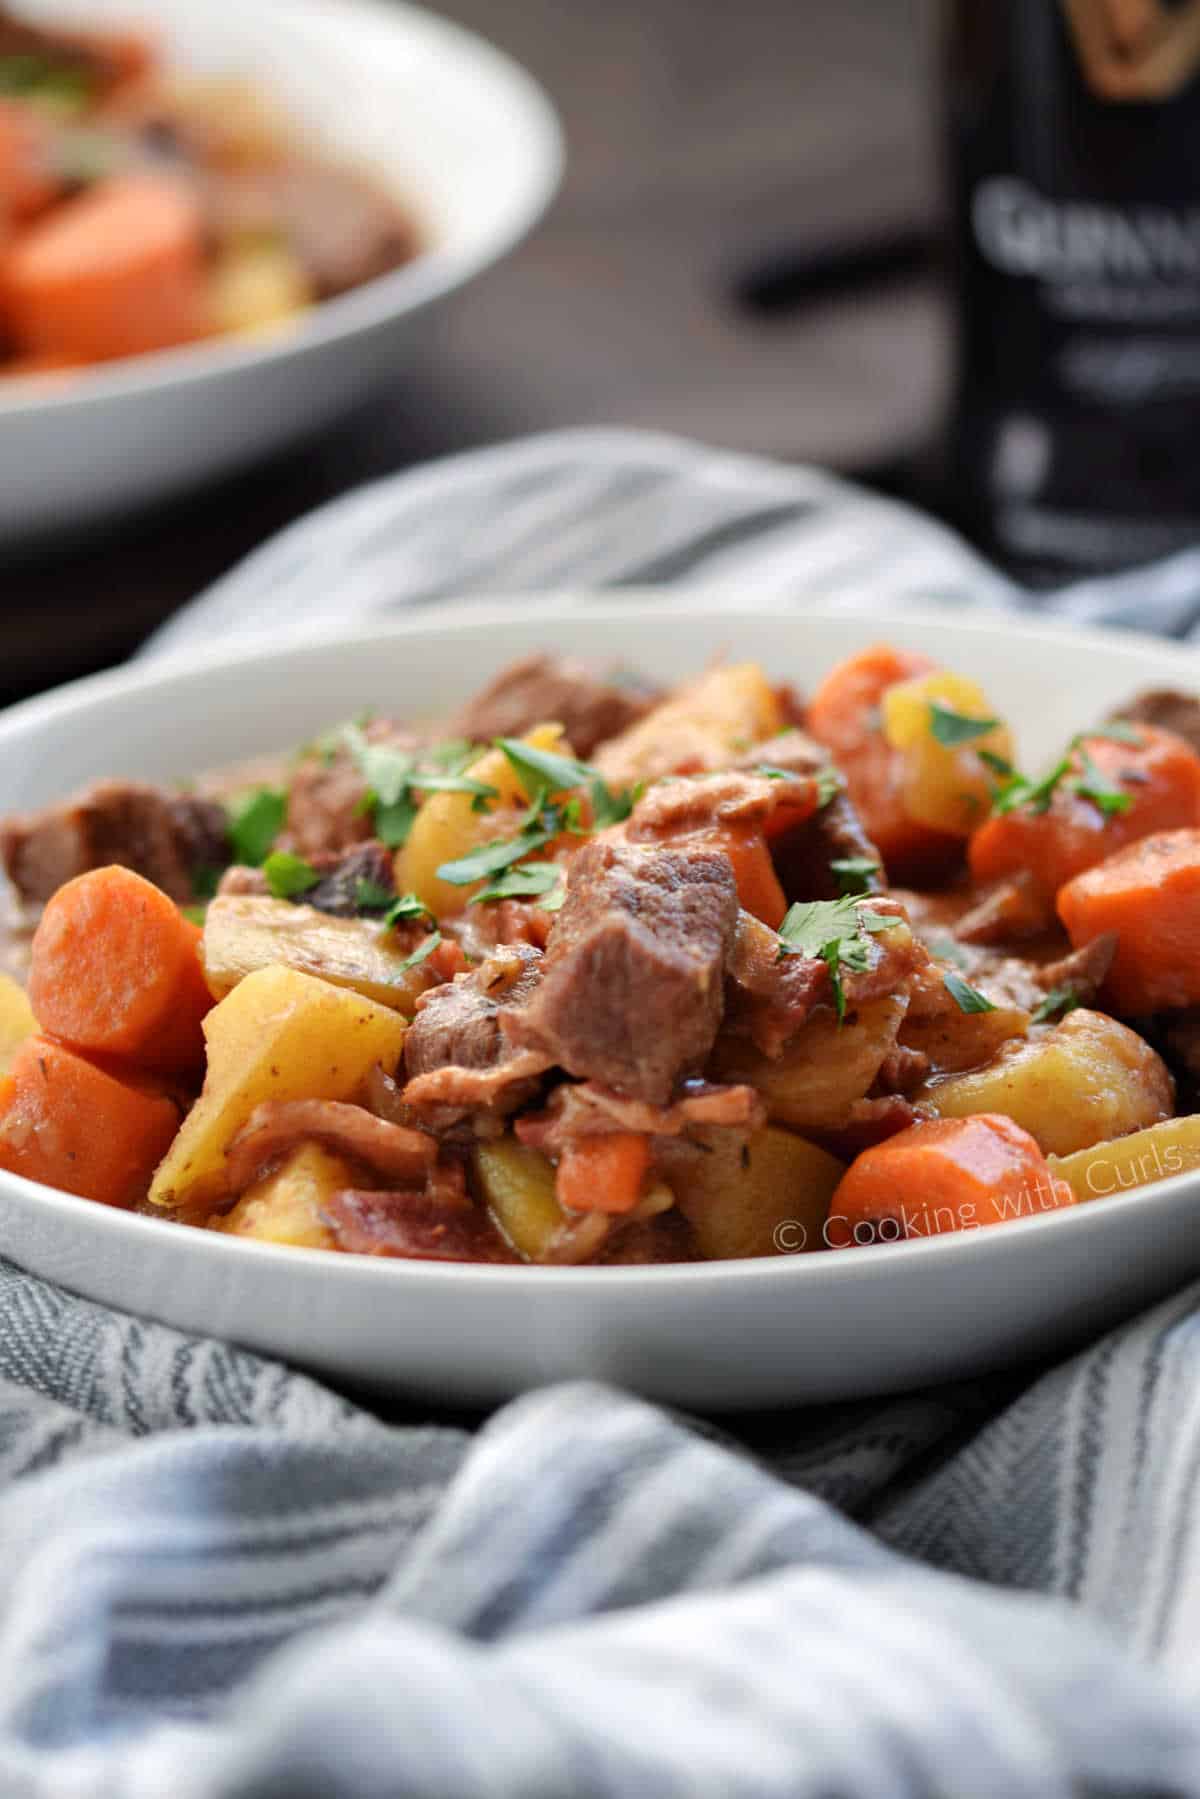 Two bowls of beef stew with carrots, potatoes and a bottle of Guinness in the background.